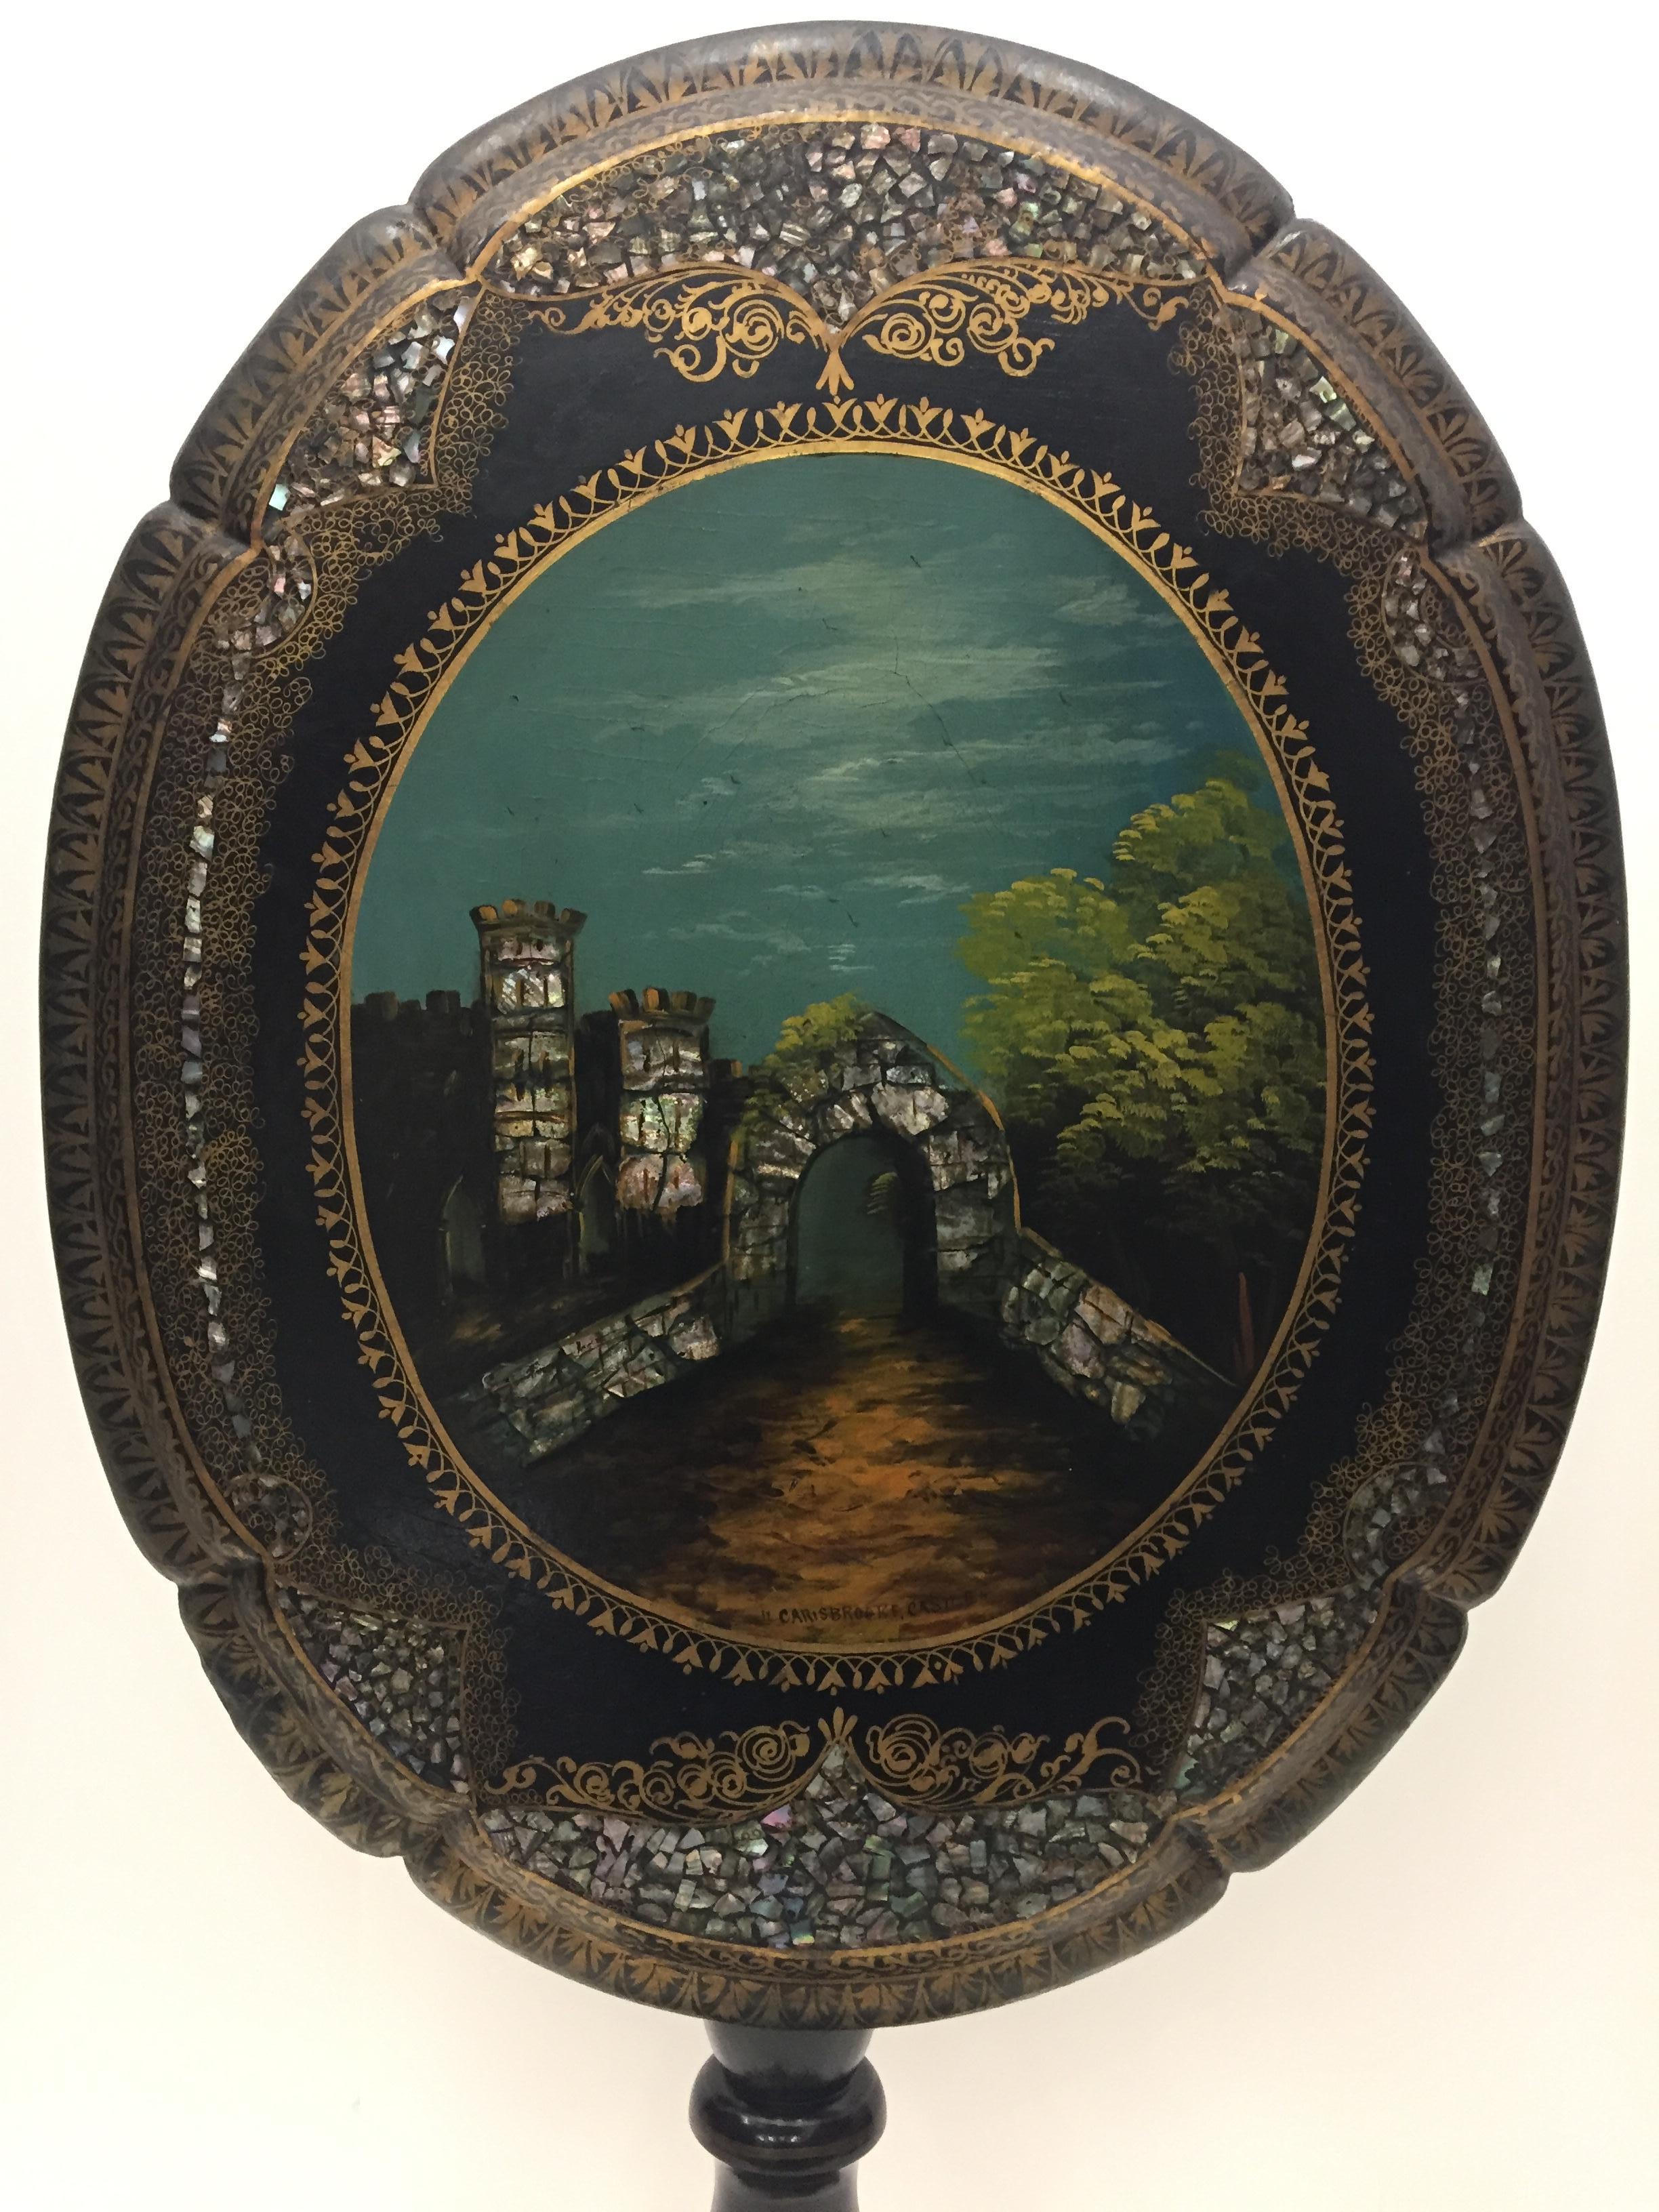 A true work of art in an oval tilt-top antique table having a hand painted scene of Carisbrooke castle and environs on the top with beautifully inlaid mother of pearl and other gold decorative material. The turned column is a beautiful shape, as is